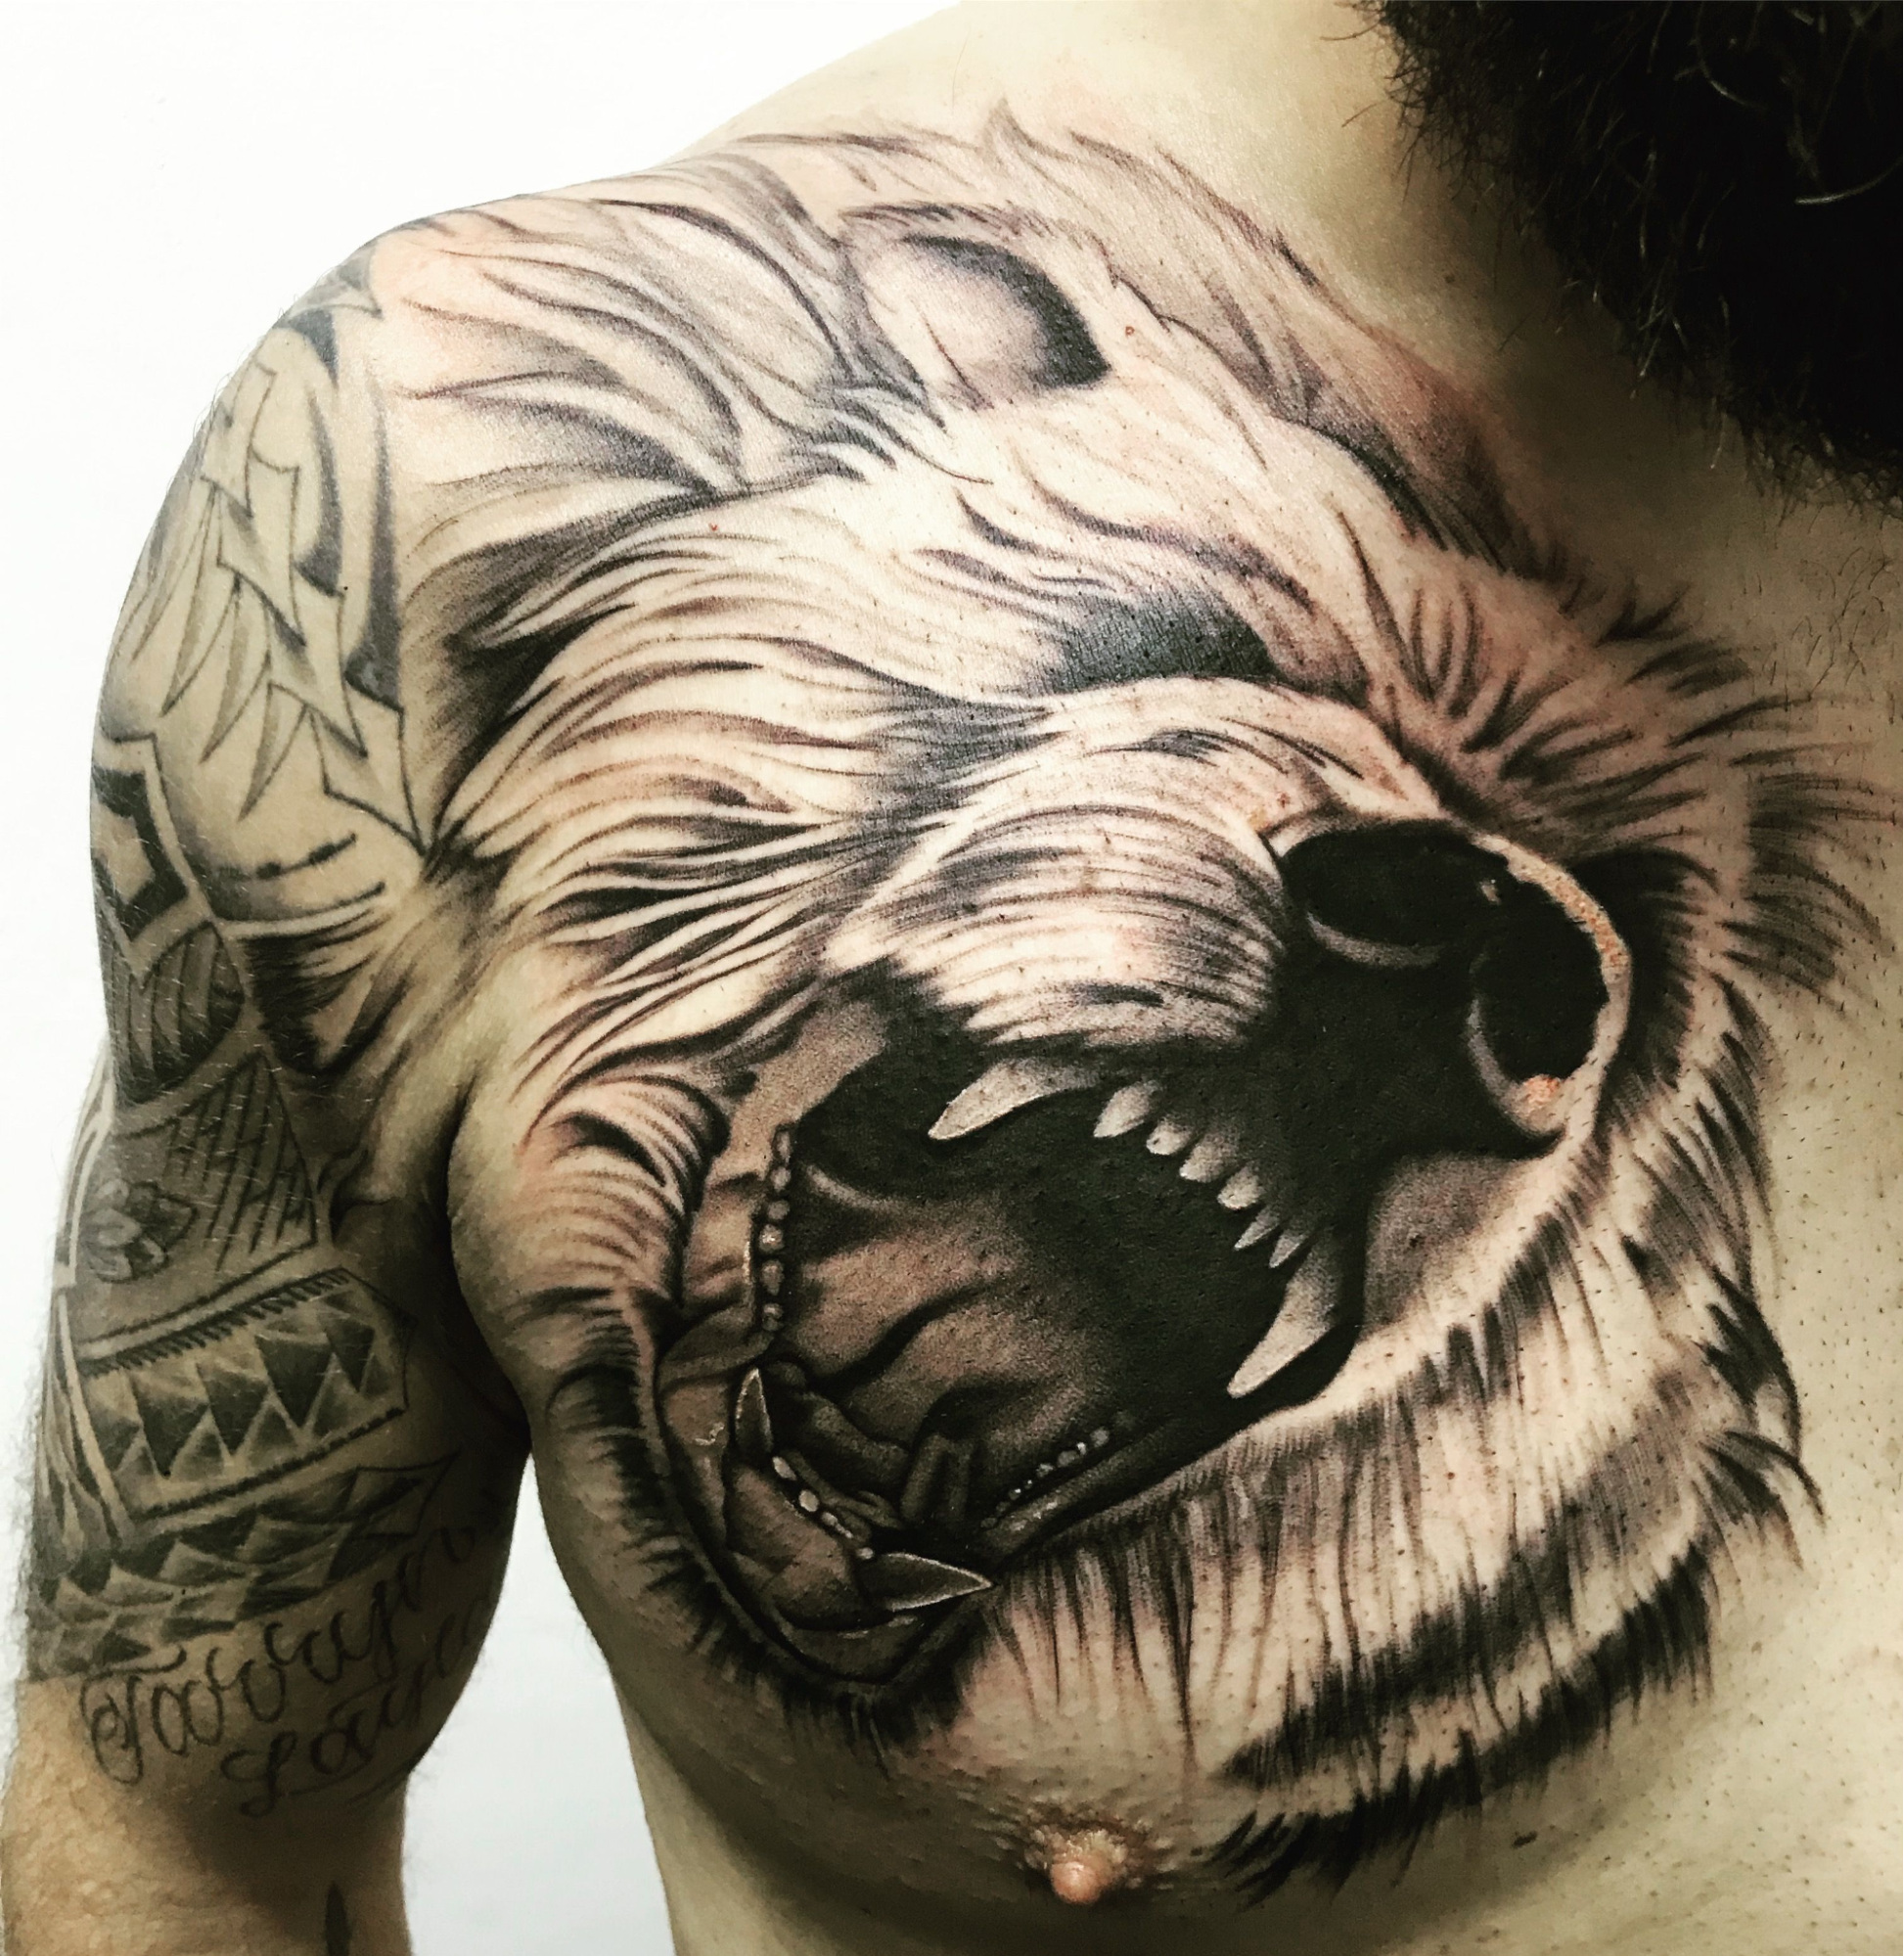 100 Nice and Creative Chest Tattoo Ideas  Art and Design